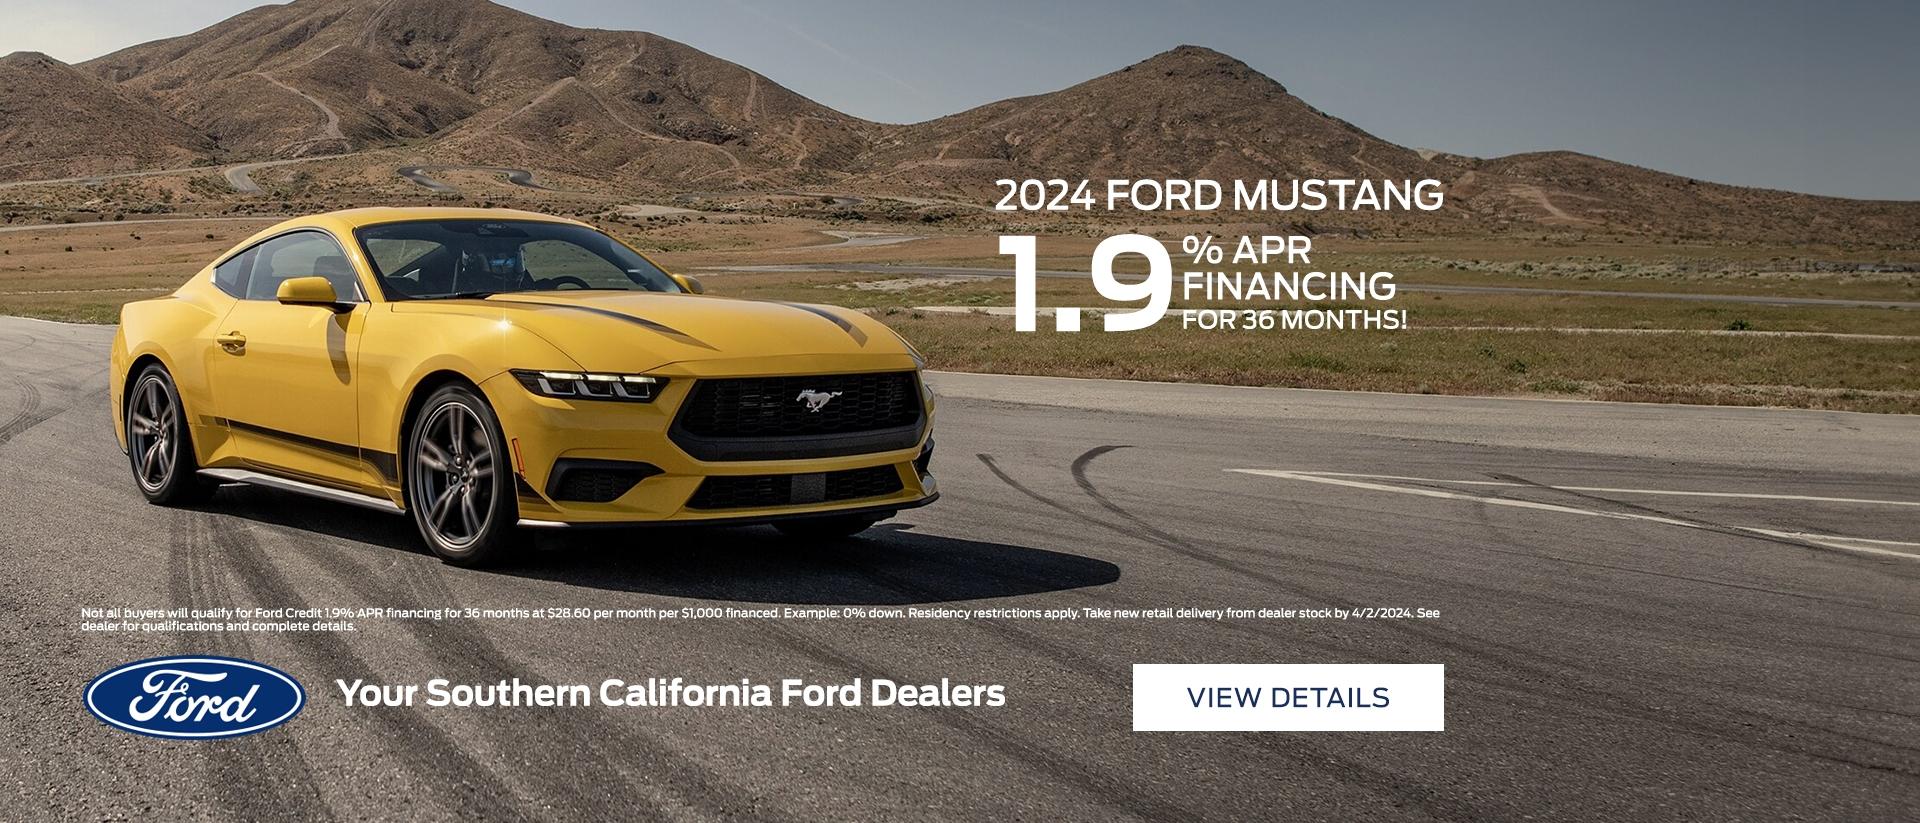 2023 Ford Mustang Purchase Offer | Southern California Ford Dealers